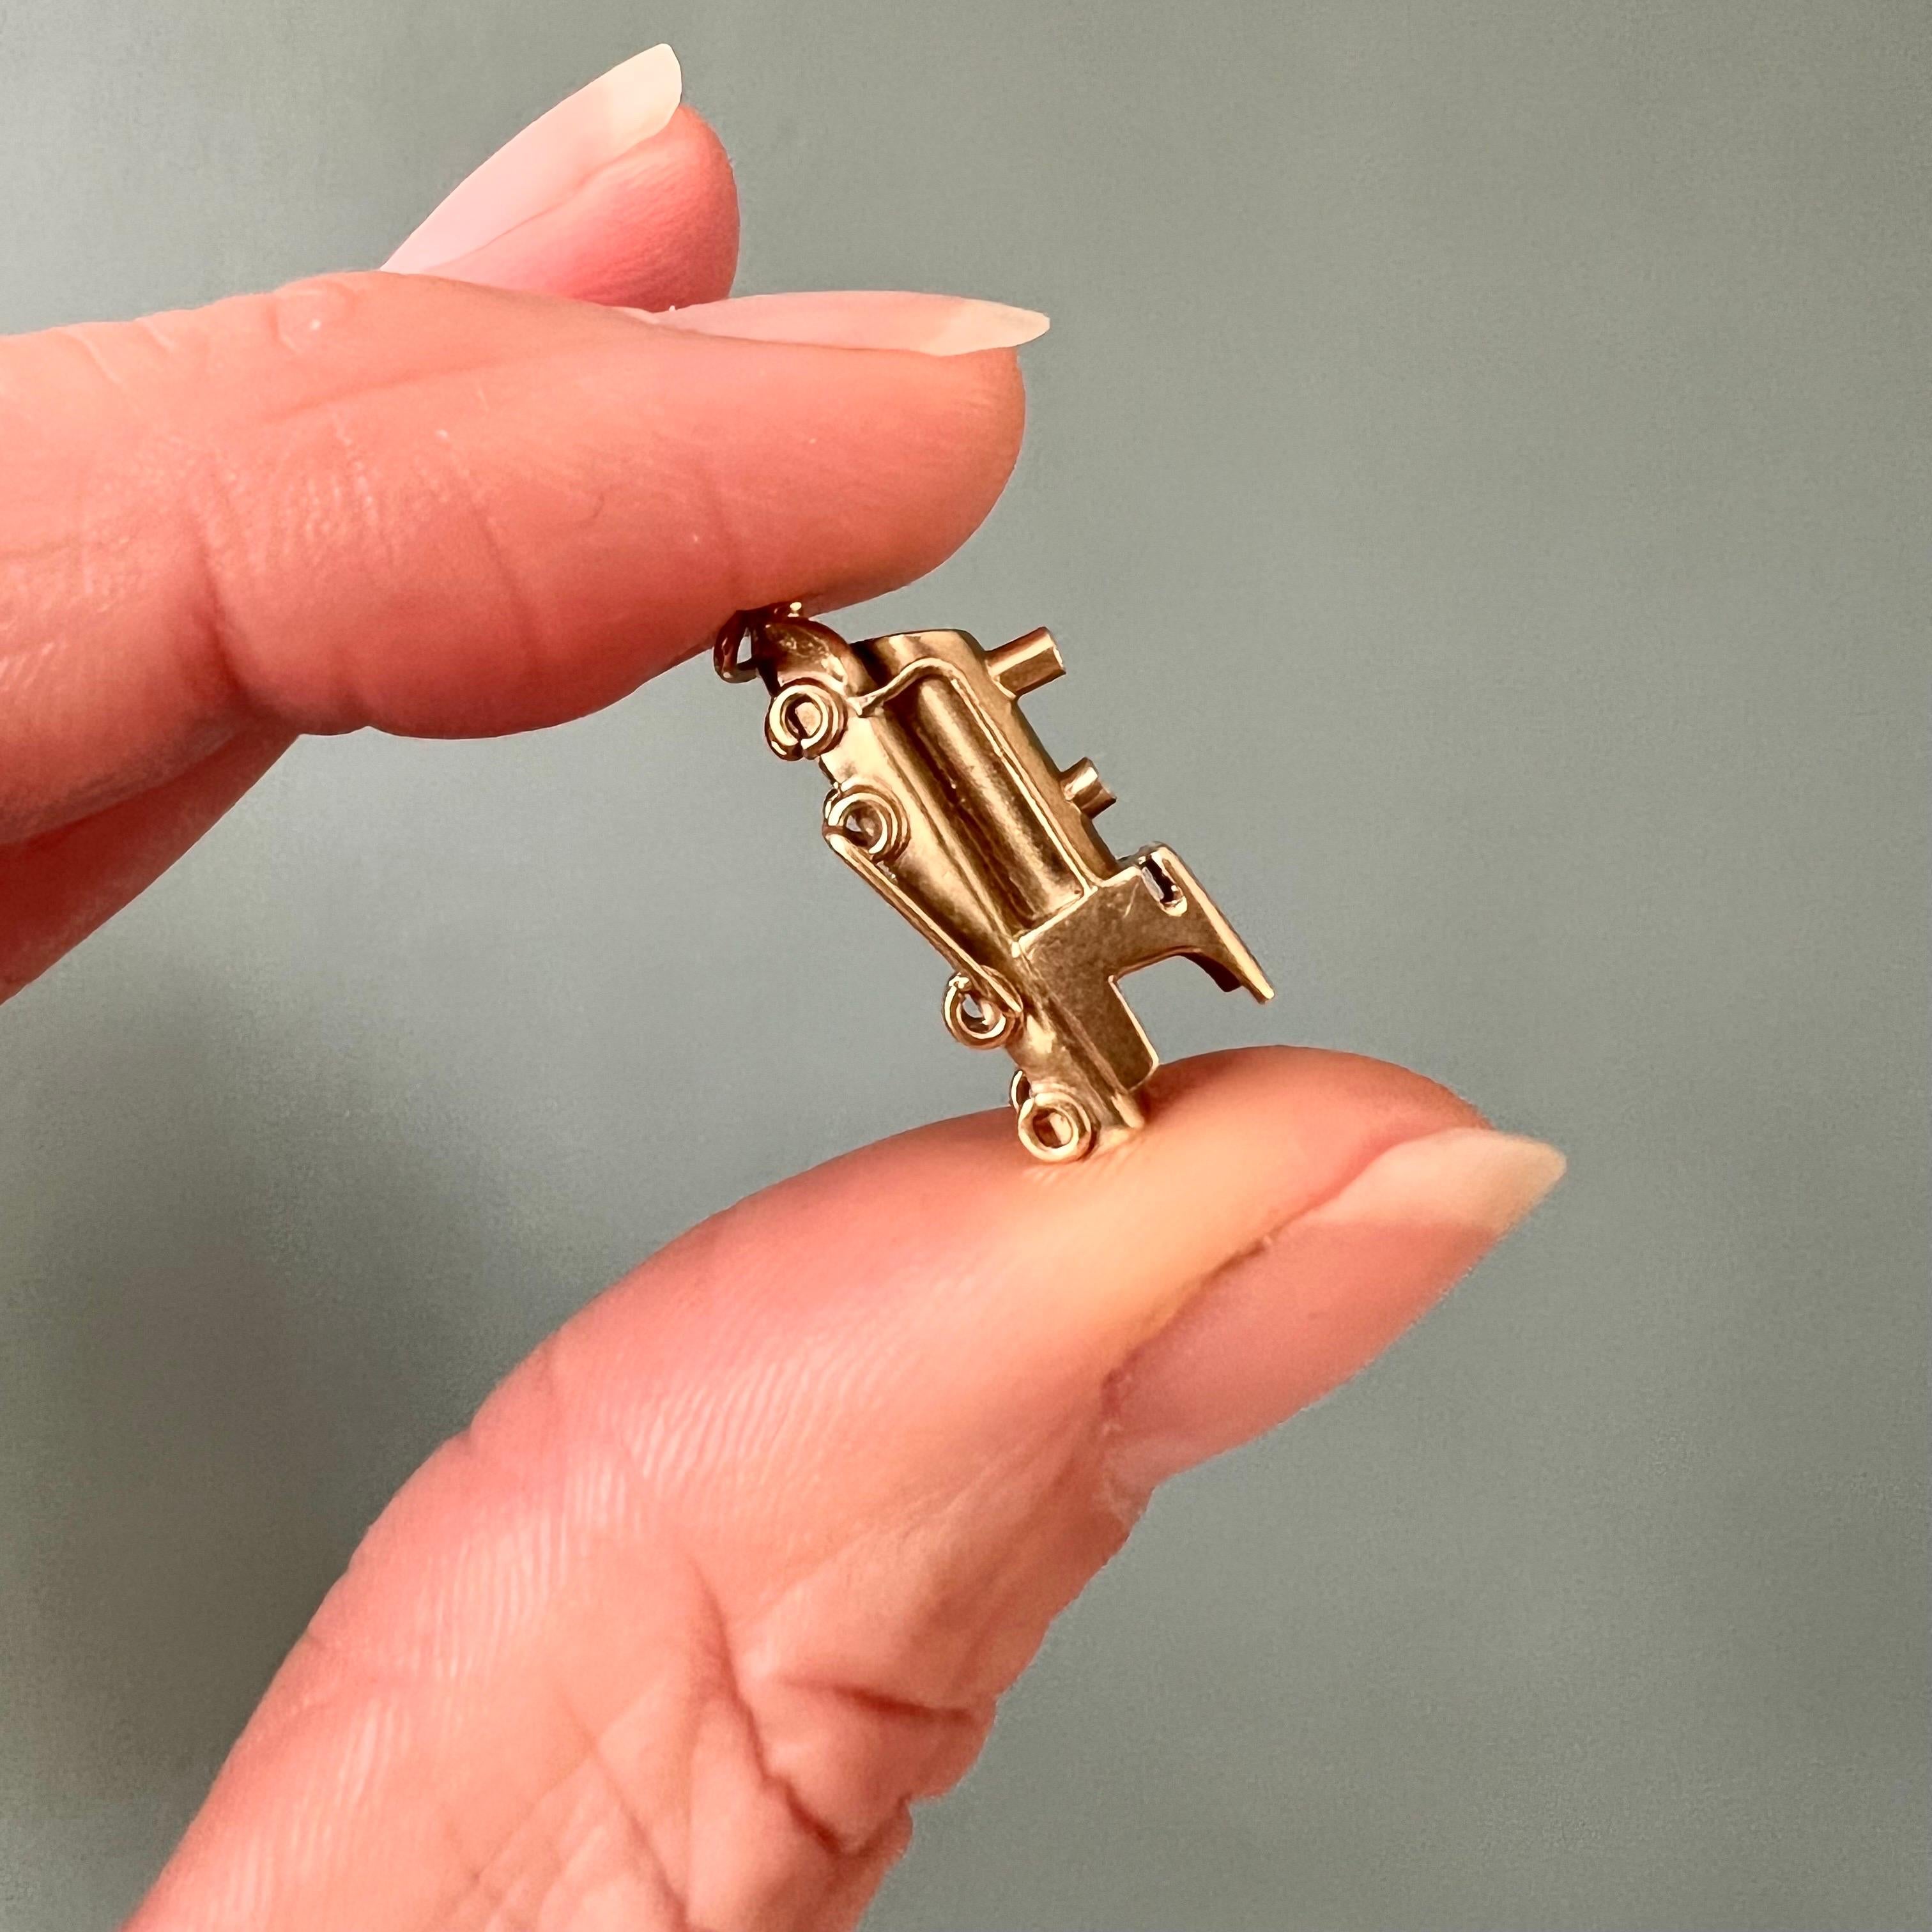 A vintage 14 karat gold locomotive train charm pendant. The locomotive is beautifully detailed with an open cab, a steam dome and sand dome.  

Collect your own charms as wearable memories, it has a symbolic and often a sentimental value. This